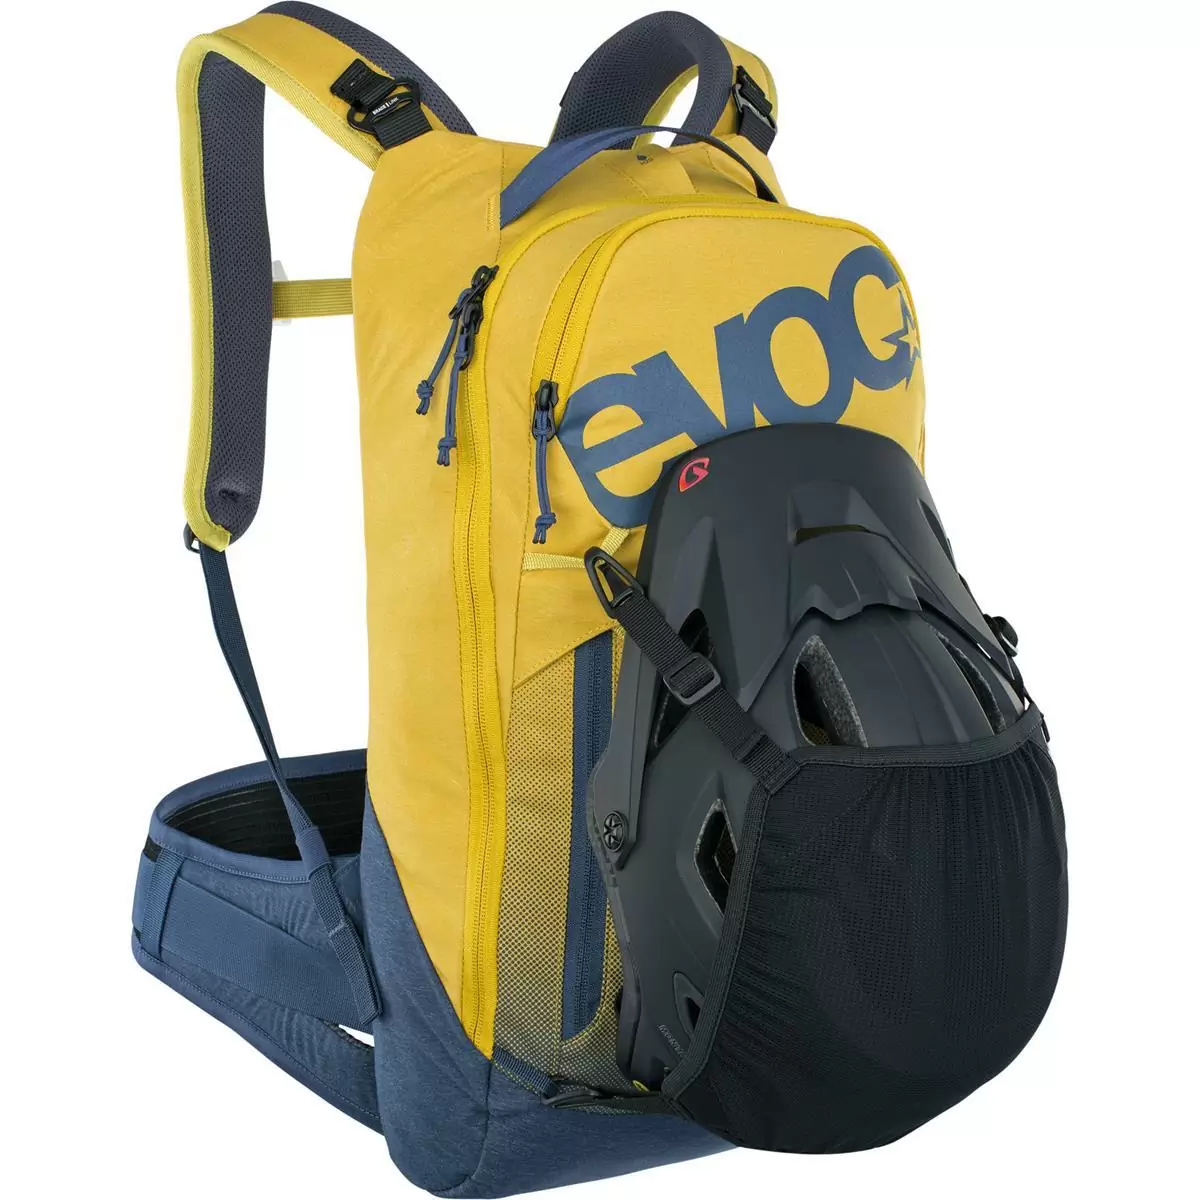 Trail Pro backpack 10 liters Curry – Denim with back protector size S/M #3